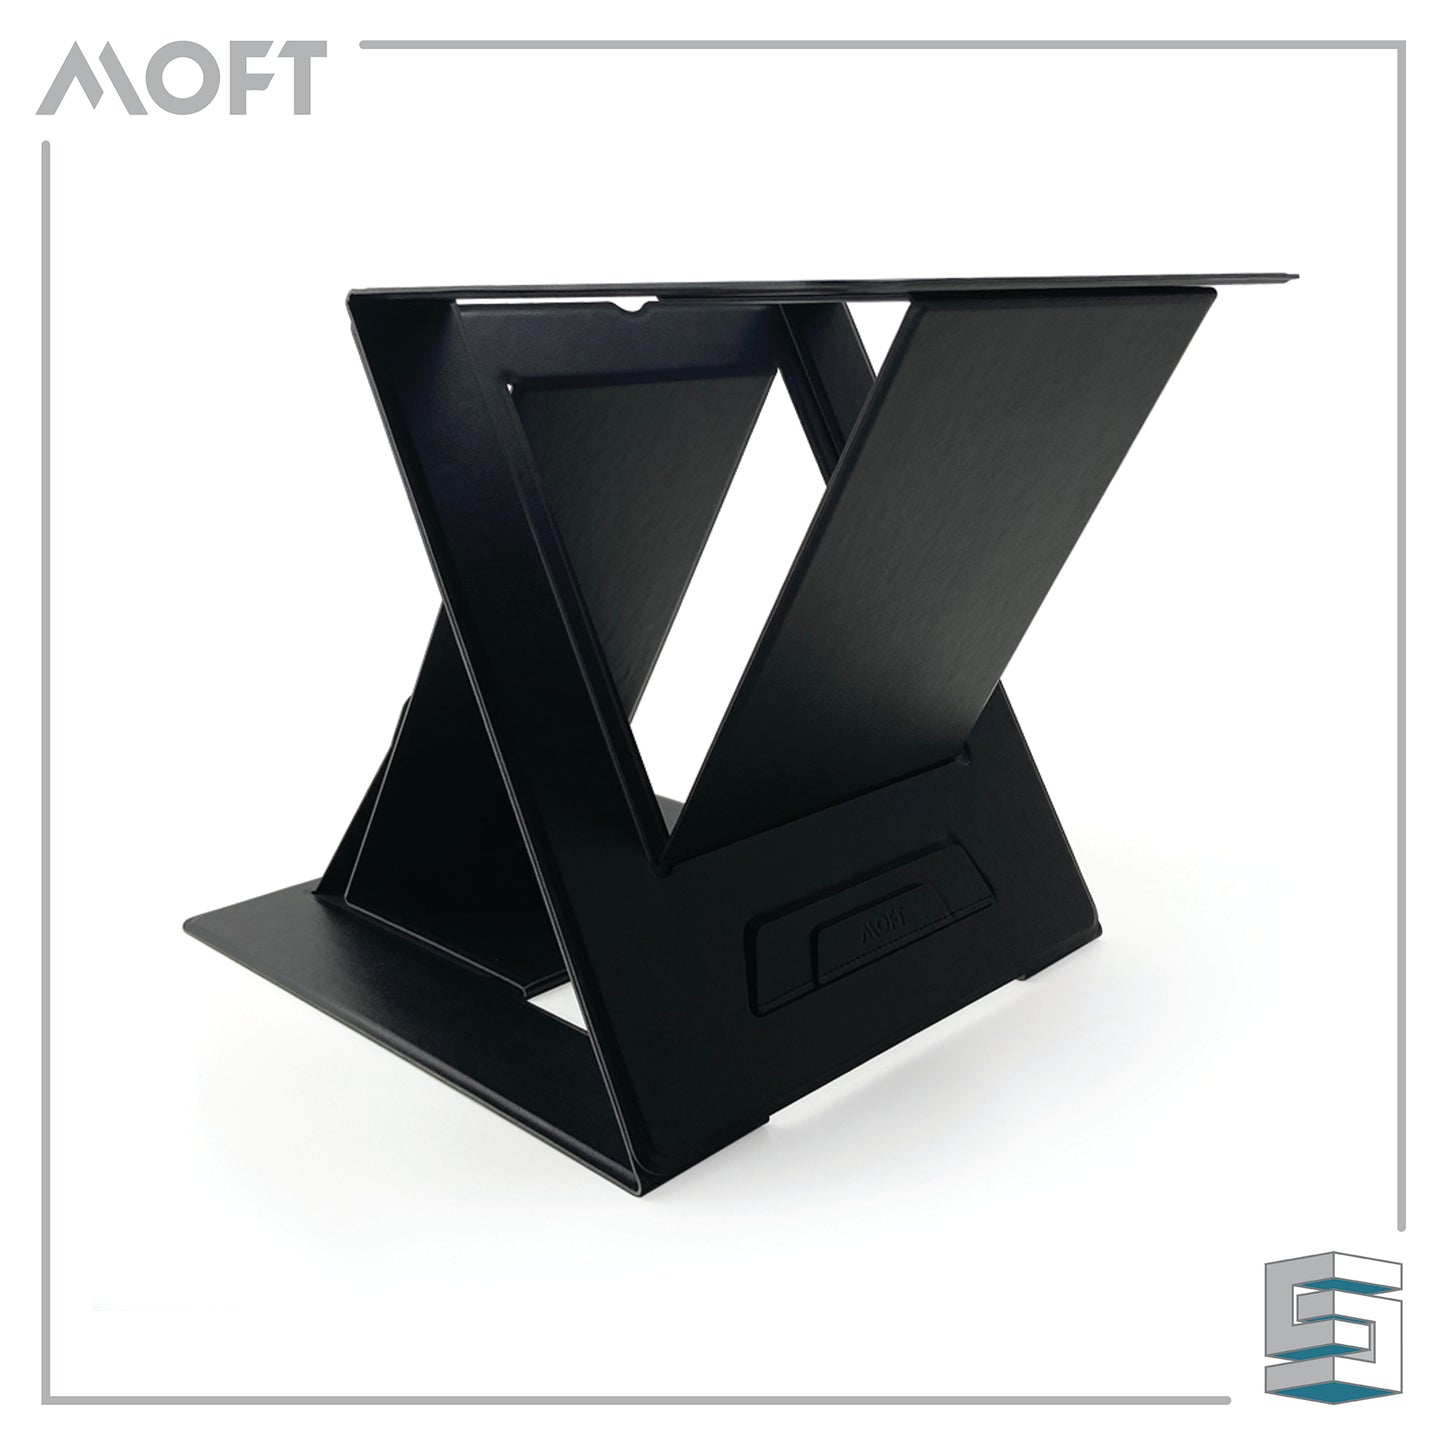 Laptop Stand/Desk - MOFT Z Sit-Stand Laptop Desk Global Synergy Concepts